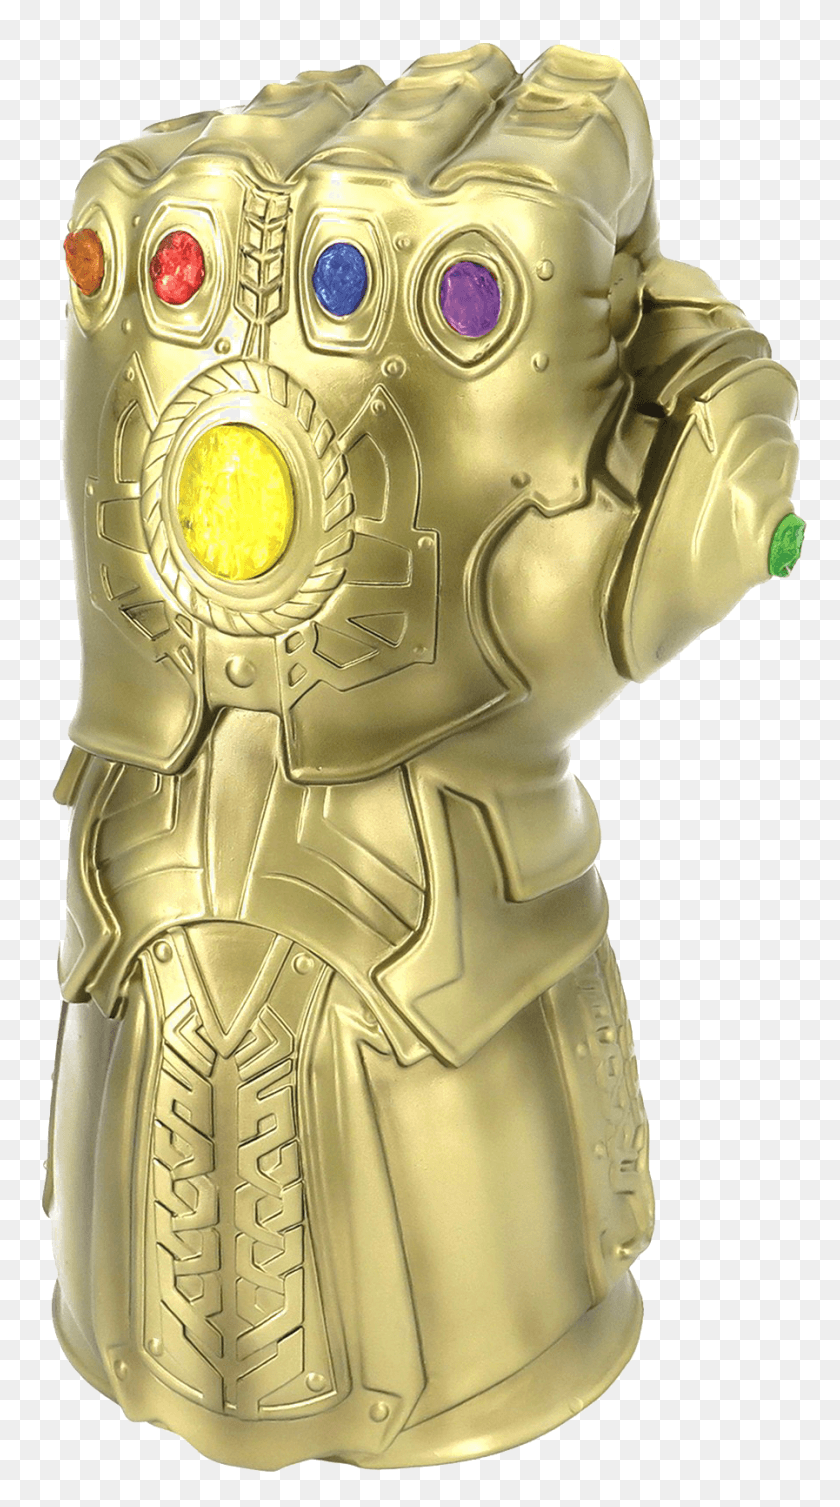 897x1665 Thanos Infinity Stone Gauntlet Pic Infiniti Gauntlet, Bronce, Oro, Arquitectura Hd Png